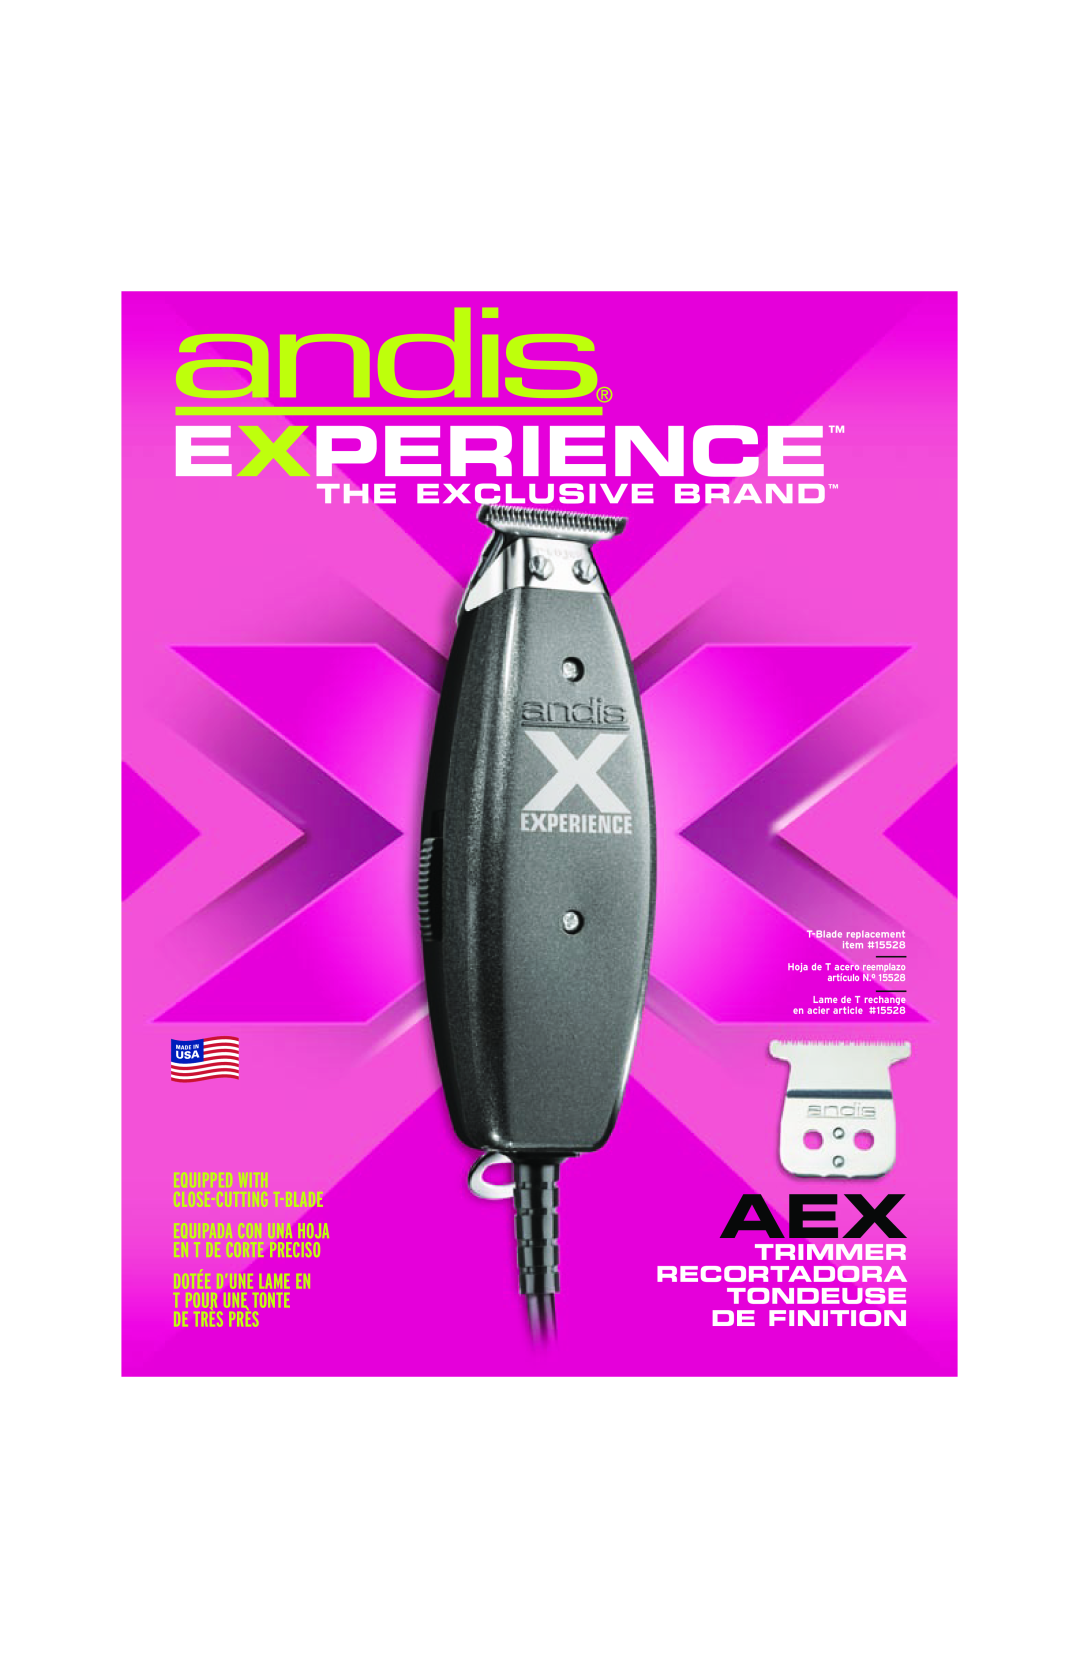 Andis Company AEE 120V manual Experience, The Exclusive Brand, Trimmer Recortadora Tondeuse De Finition 